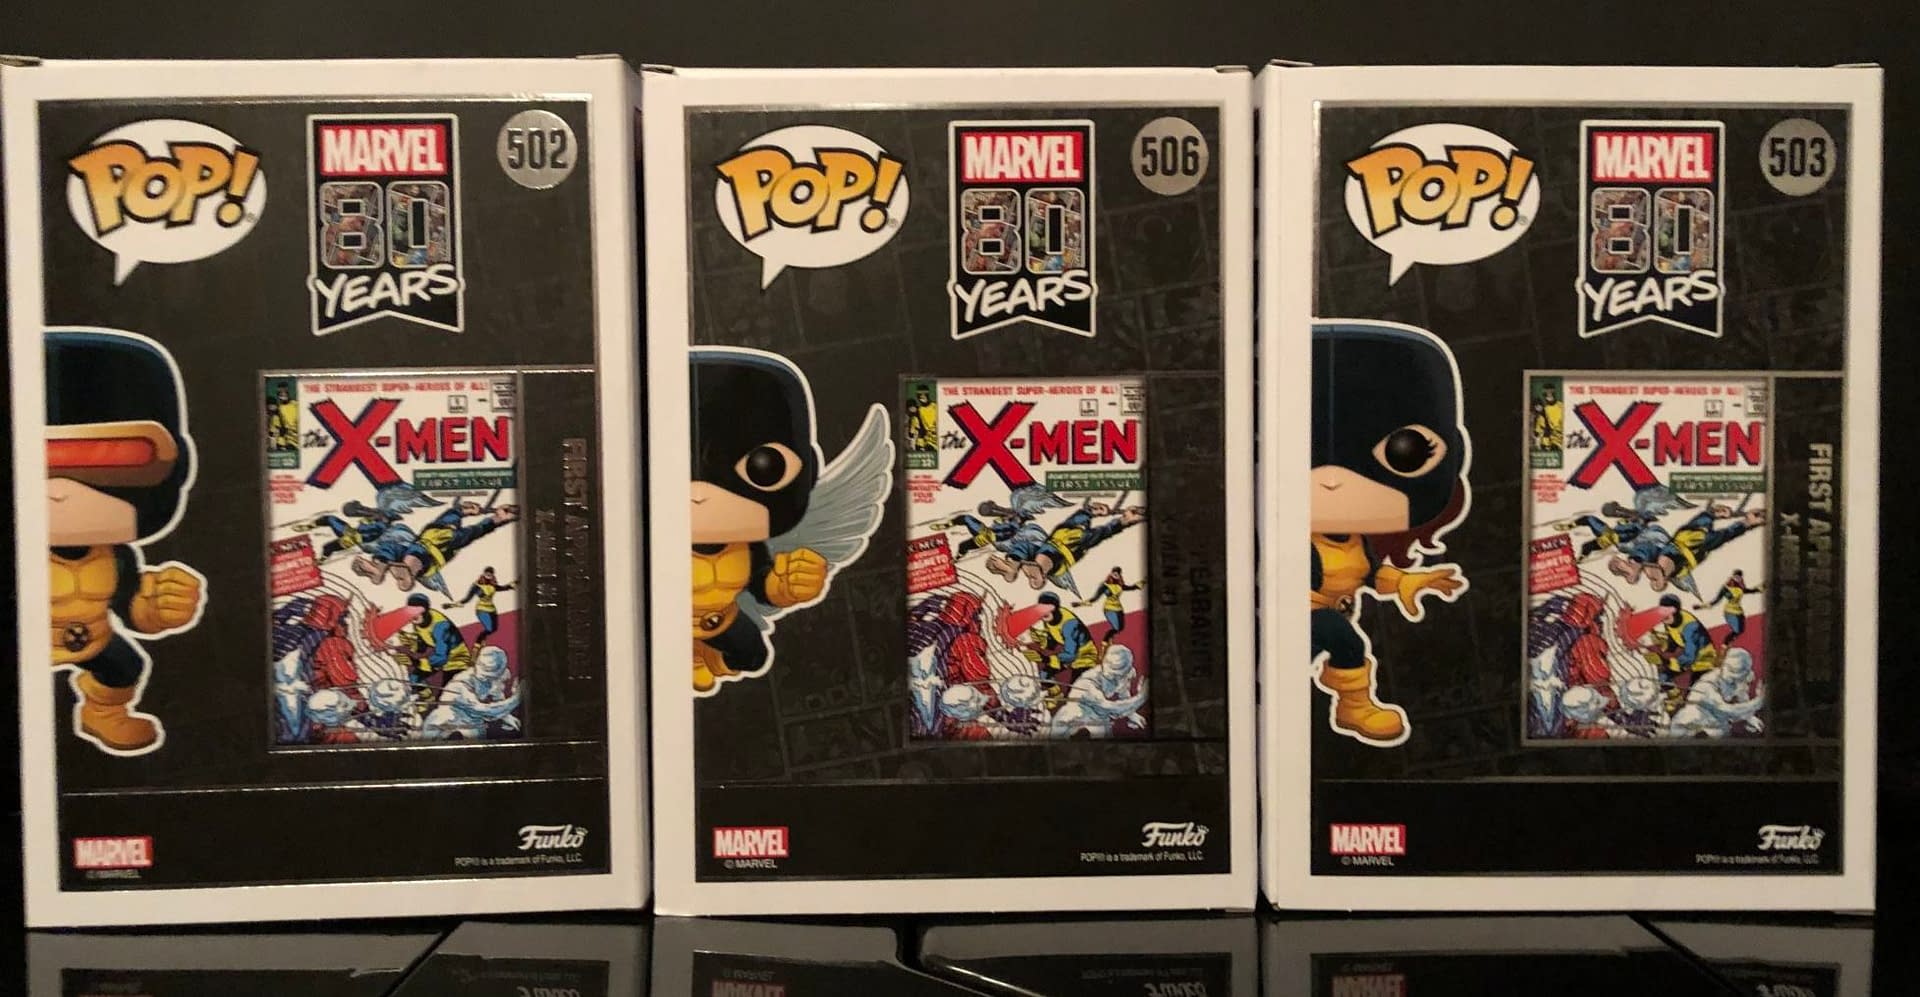 To Me, My X-Men, With Marvel 80 Years Funko Pops! [Review]